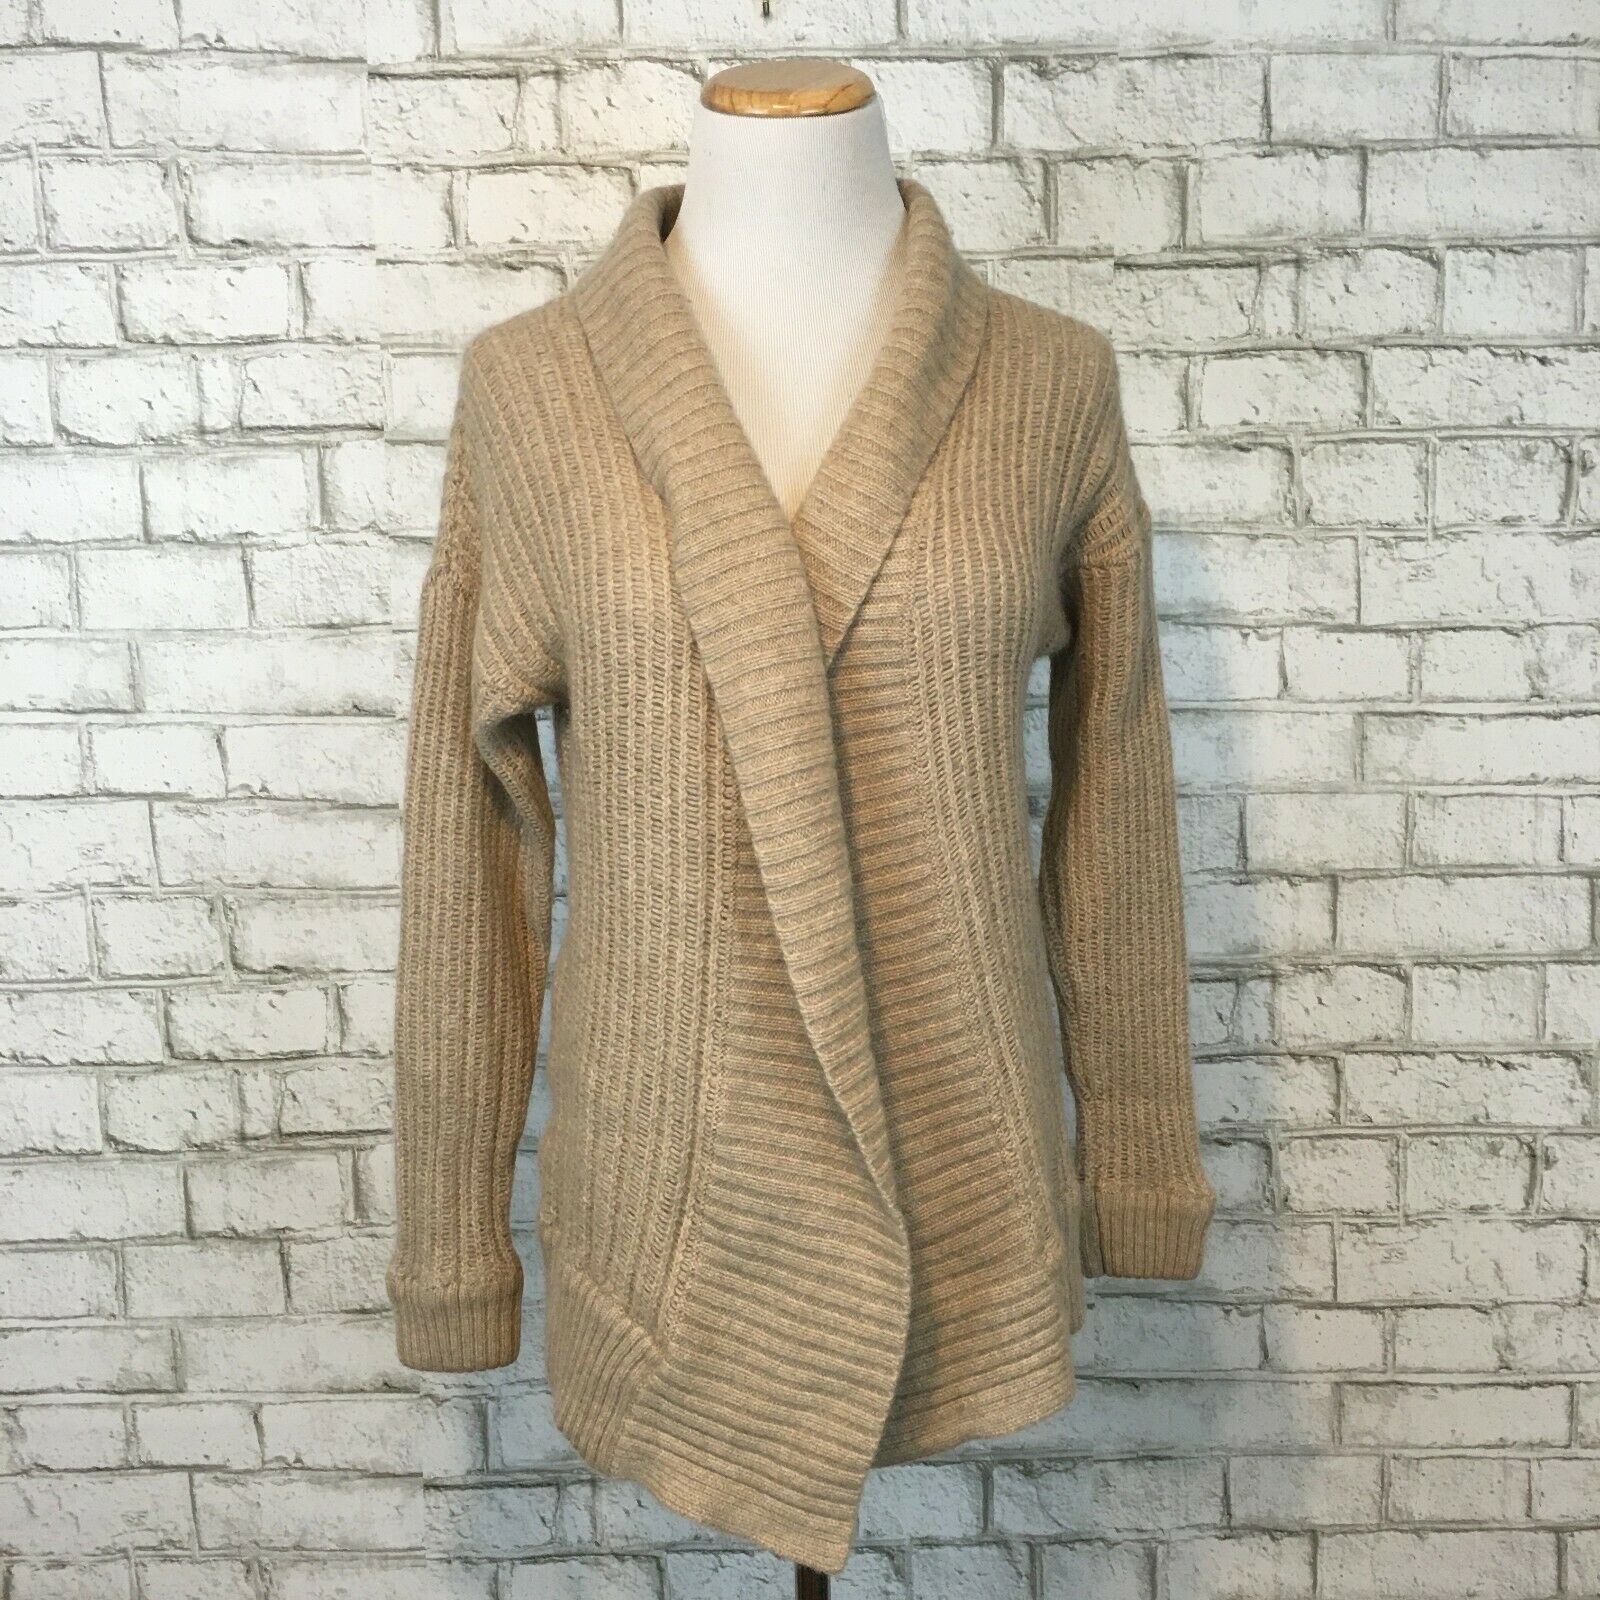 Neiman Marcus Women's Light Brown Cashmere Cardigan Sweater Size Small ...